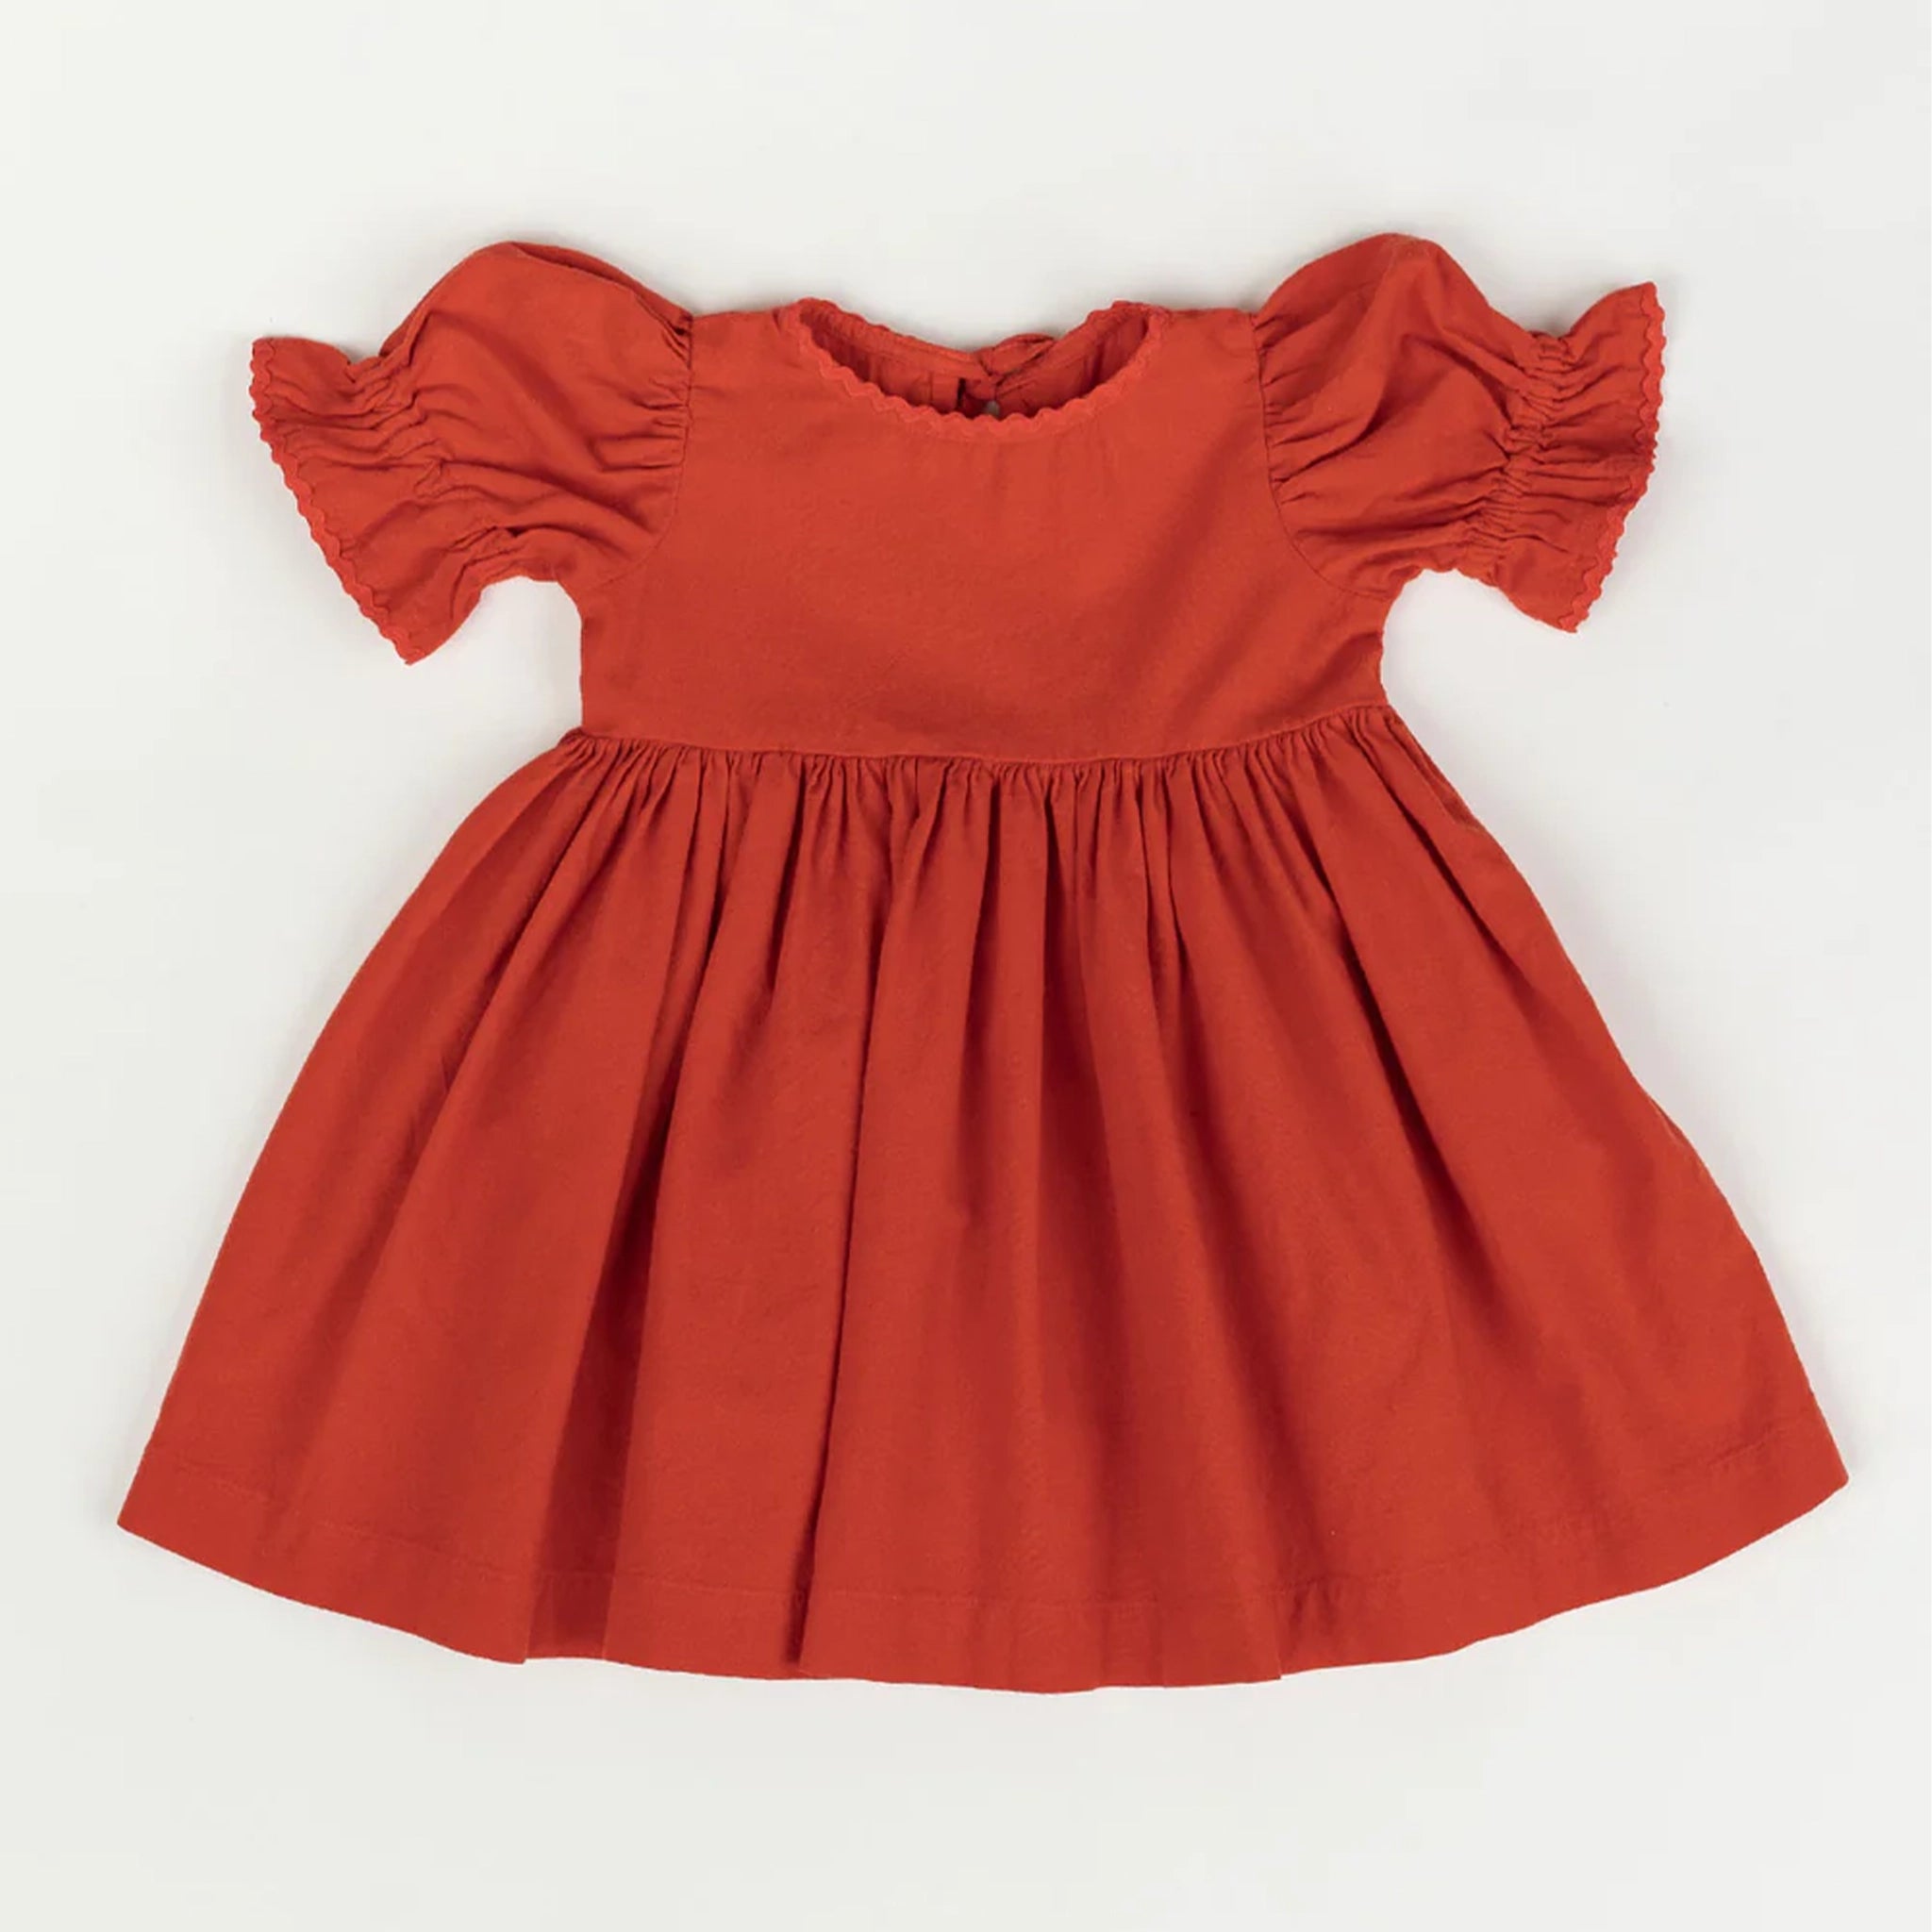 The red baby doll dress with puffy sleeves laying flat on a white background. 